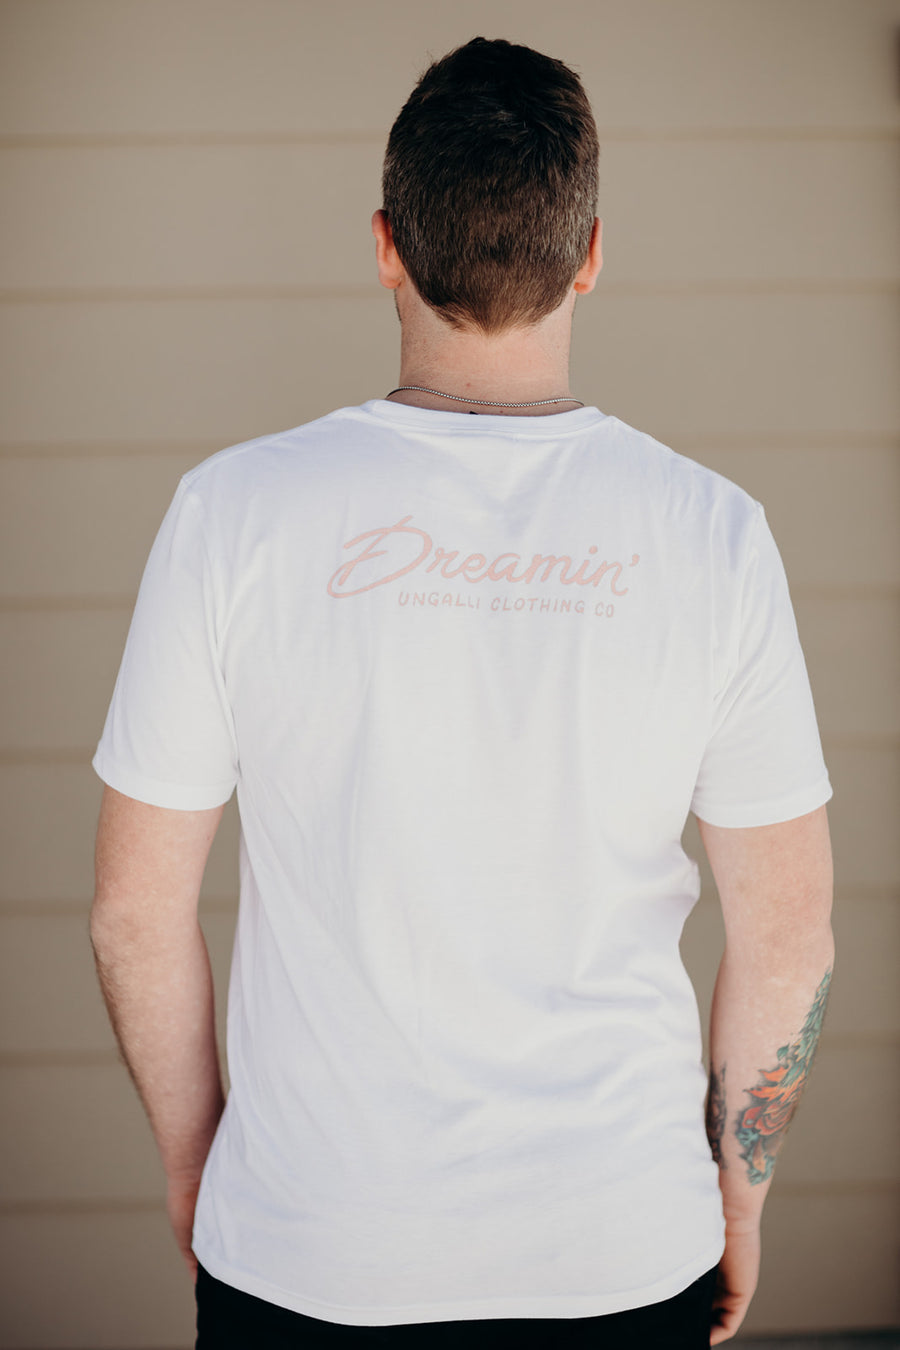 Organic white unisex t-shirt with multi-coloured dreamin' plane logo on front